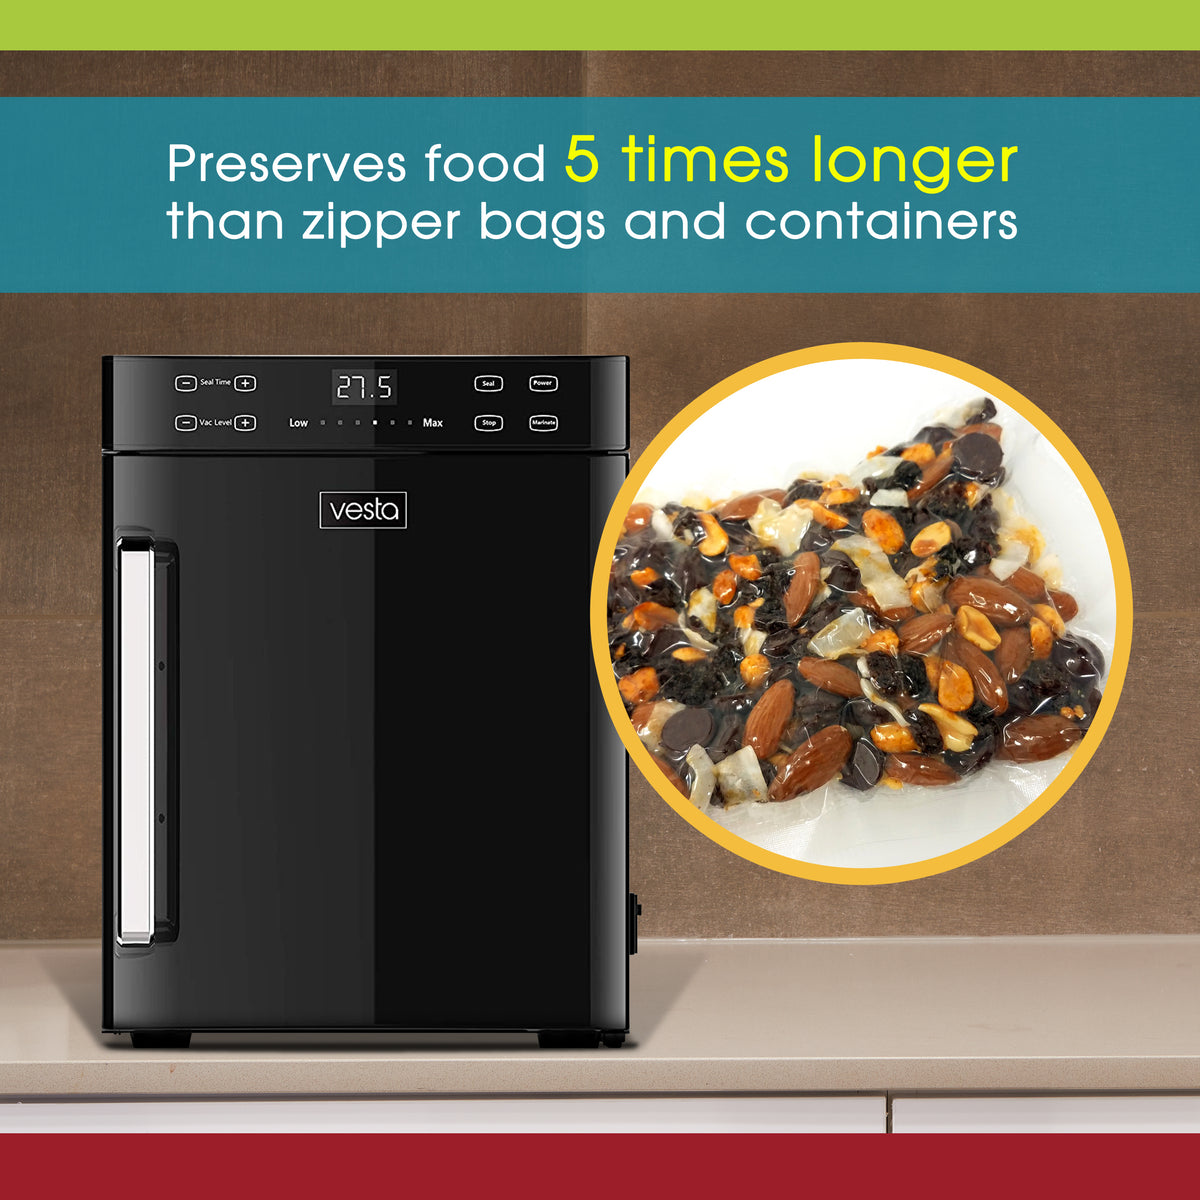 An infographic showing the Vertical Vac Elite chamber vacuum sealer and some vacuum sealed trail mix, describing how it retains freshness.